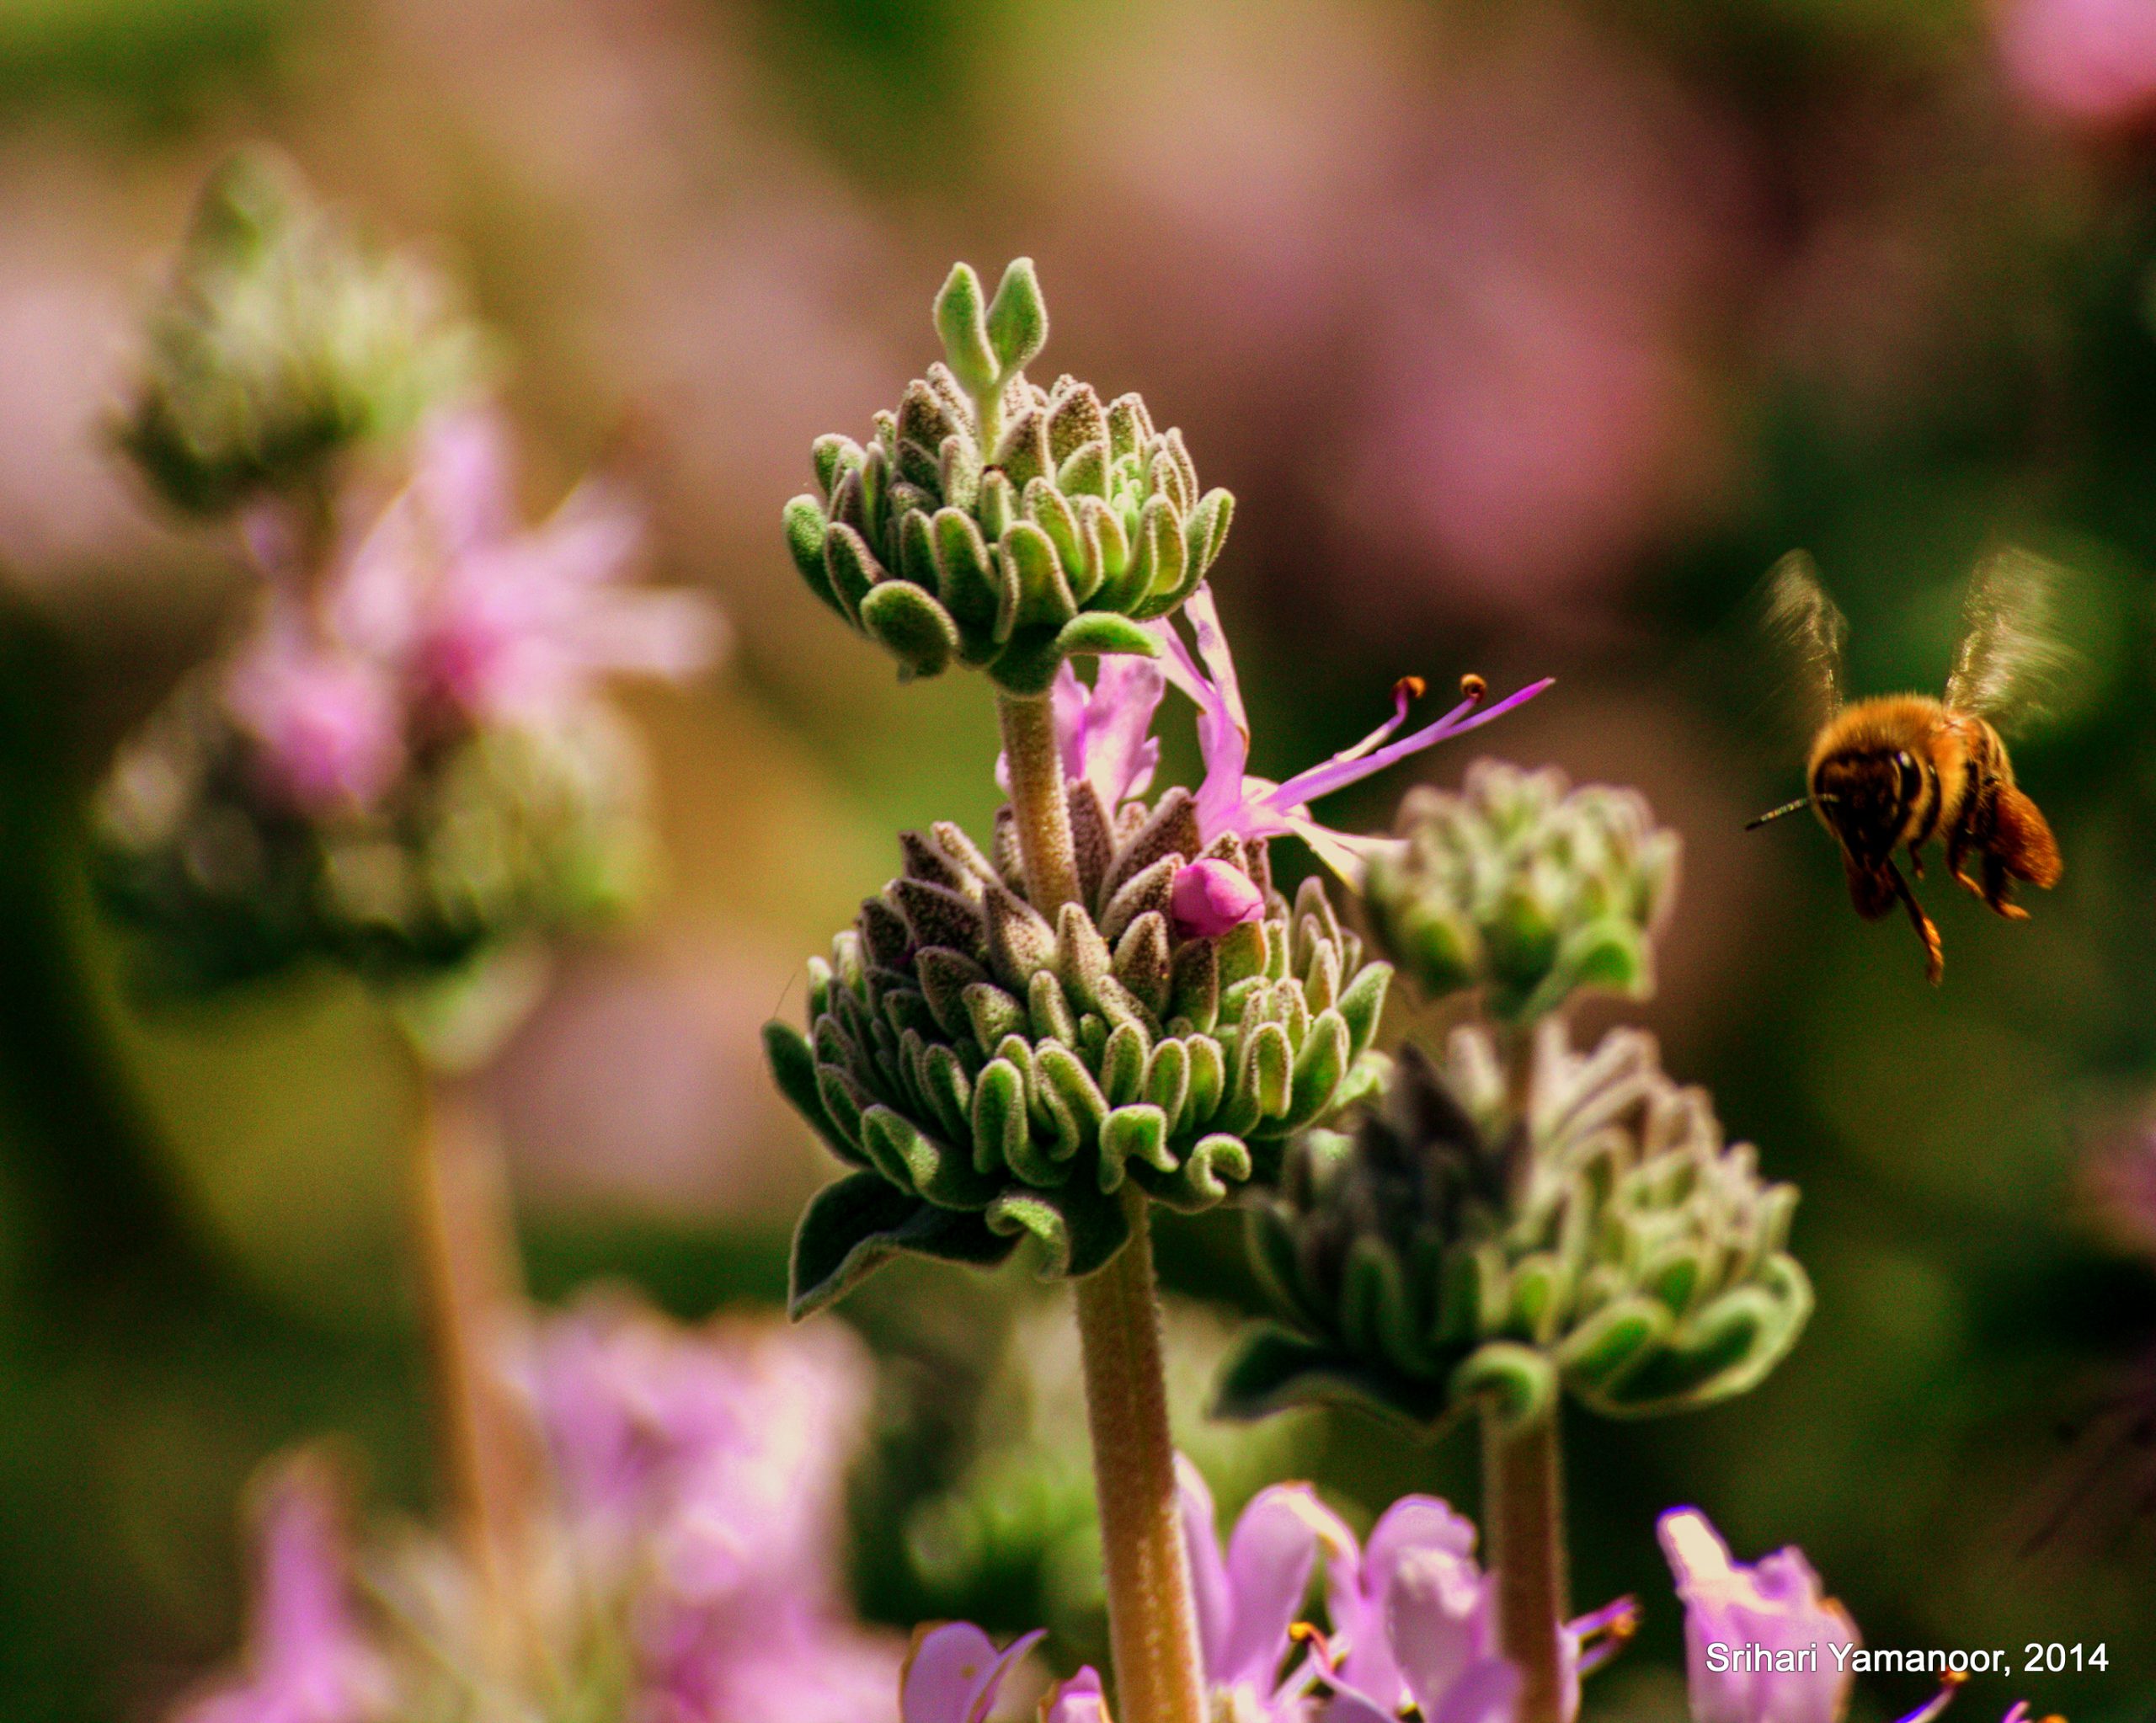 Bees, our pollinators – World/National Honey Bee Day